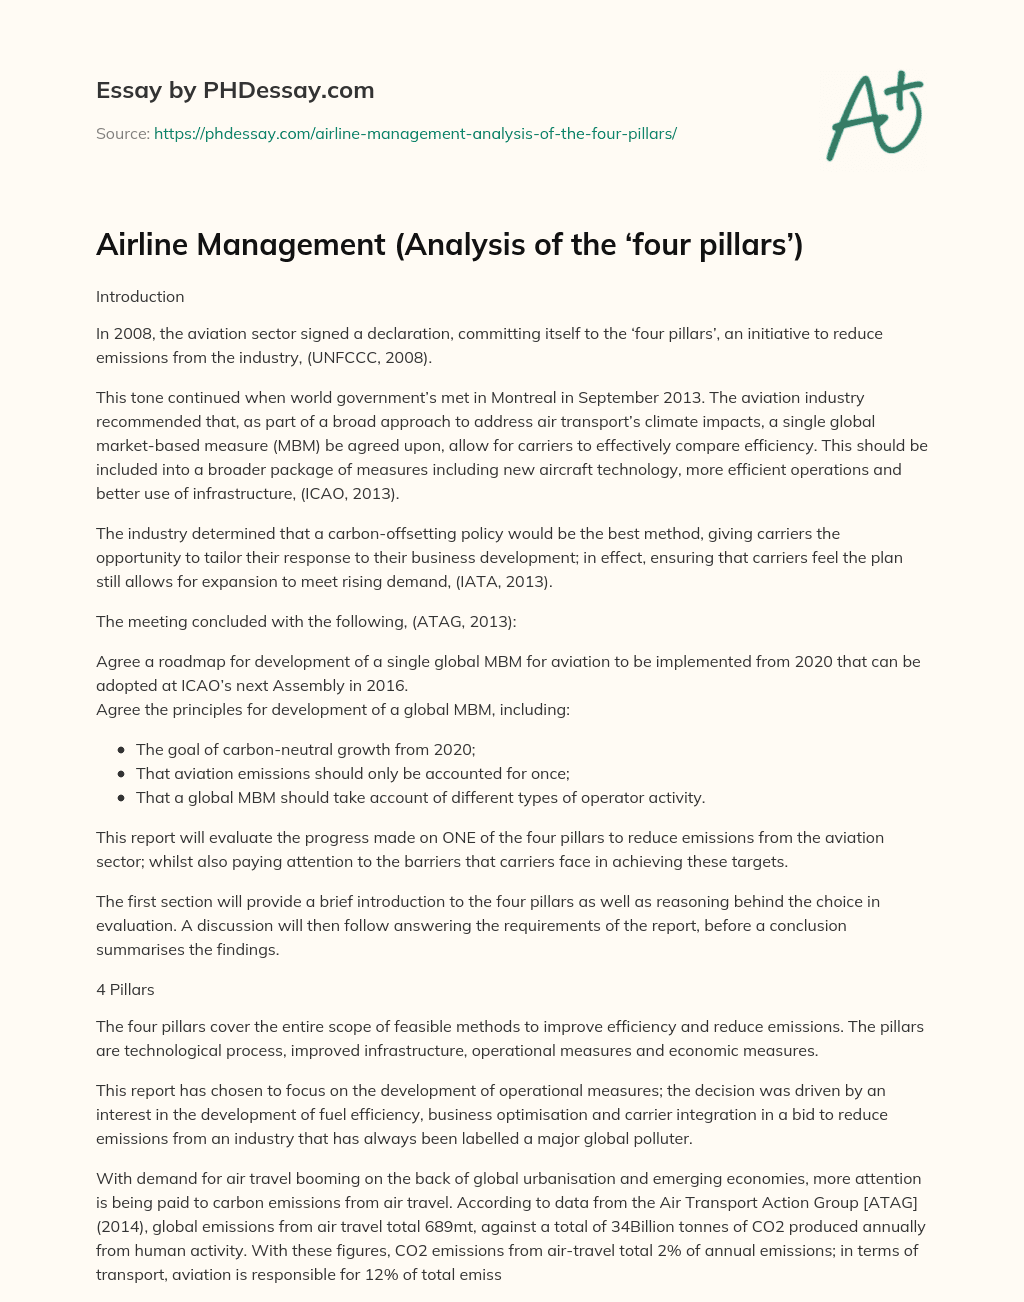 Airline Management (Analysis of the ‘four pillars’) essay